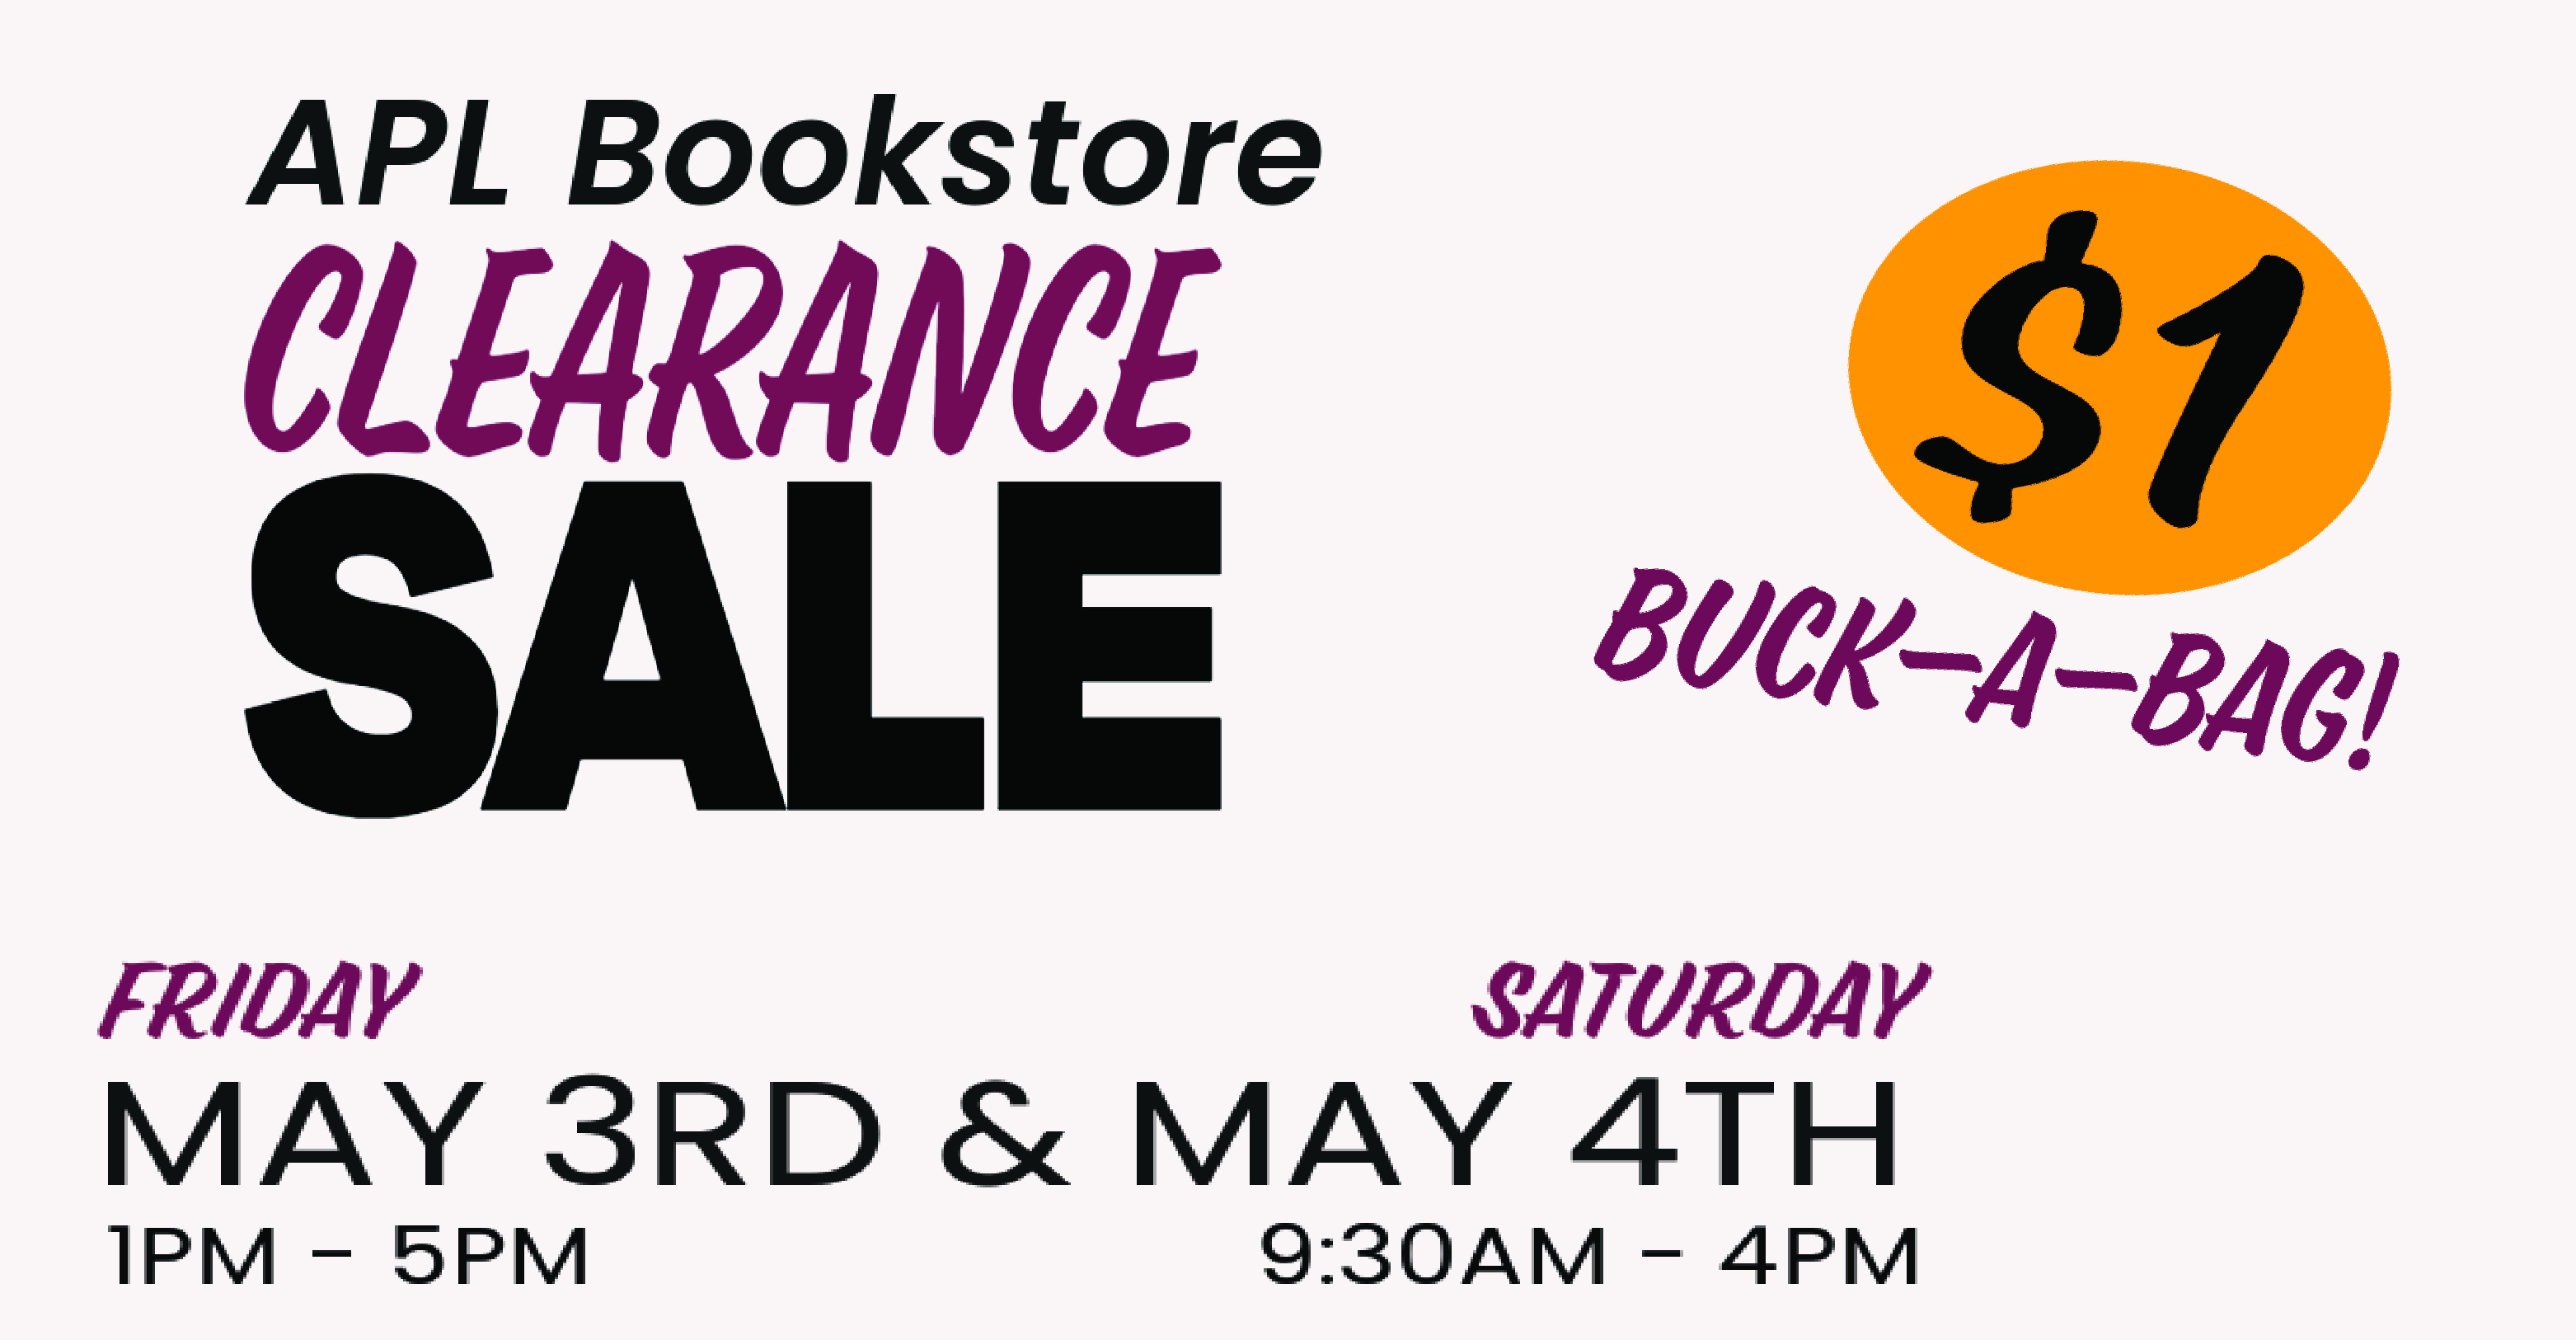 APL Bookstore Clearance Sale 